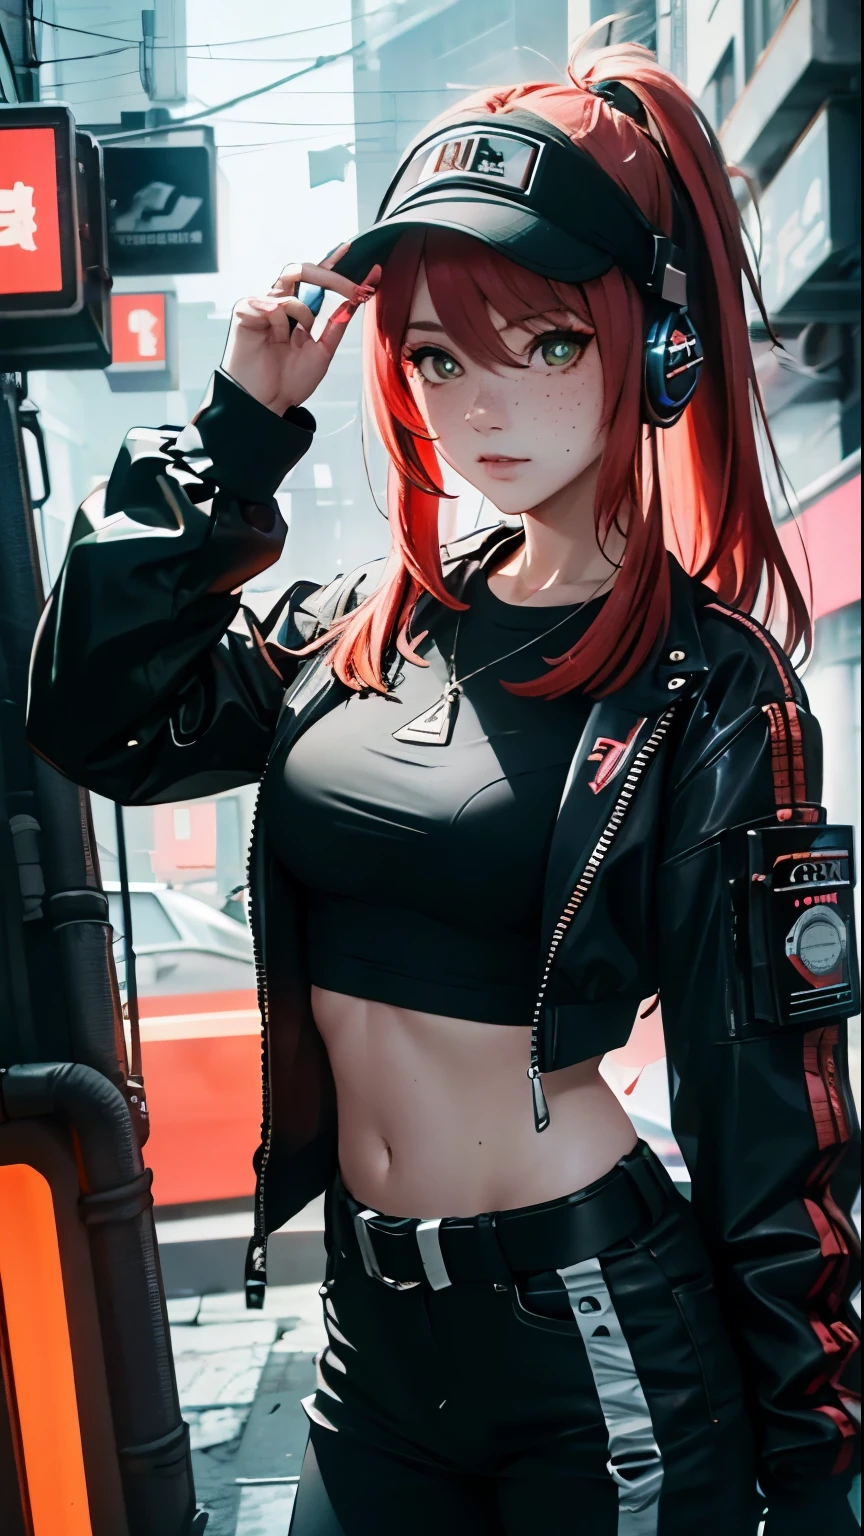 ((Best Quality)), ((Masterpiece)), perfect eyes 1:2, detailed eyes:1.4, ((freckles)), woman, hightech visor, high tech, hacker, irezumi, tattoo, techwear, headphones, messy hair, multicolored hair, green hair, black jacket, gradient hair, leather clothes, (High Definition:1.3), 3D, Beautiful (Cyberpunk:1.3), Colored hair, militar, black clothes looking at camera, hacker woman, sticking out, sexual, seduction, neo tokyo